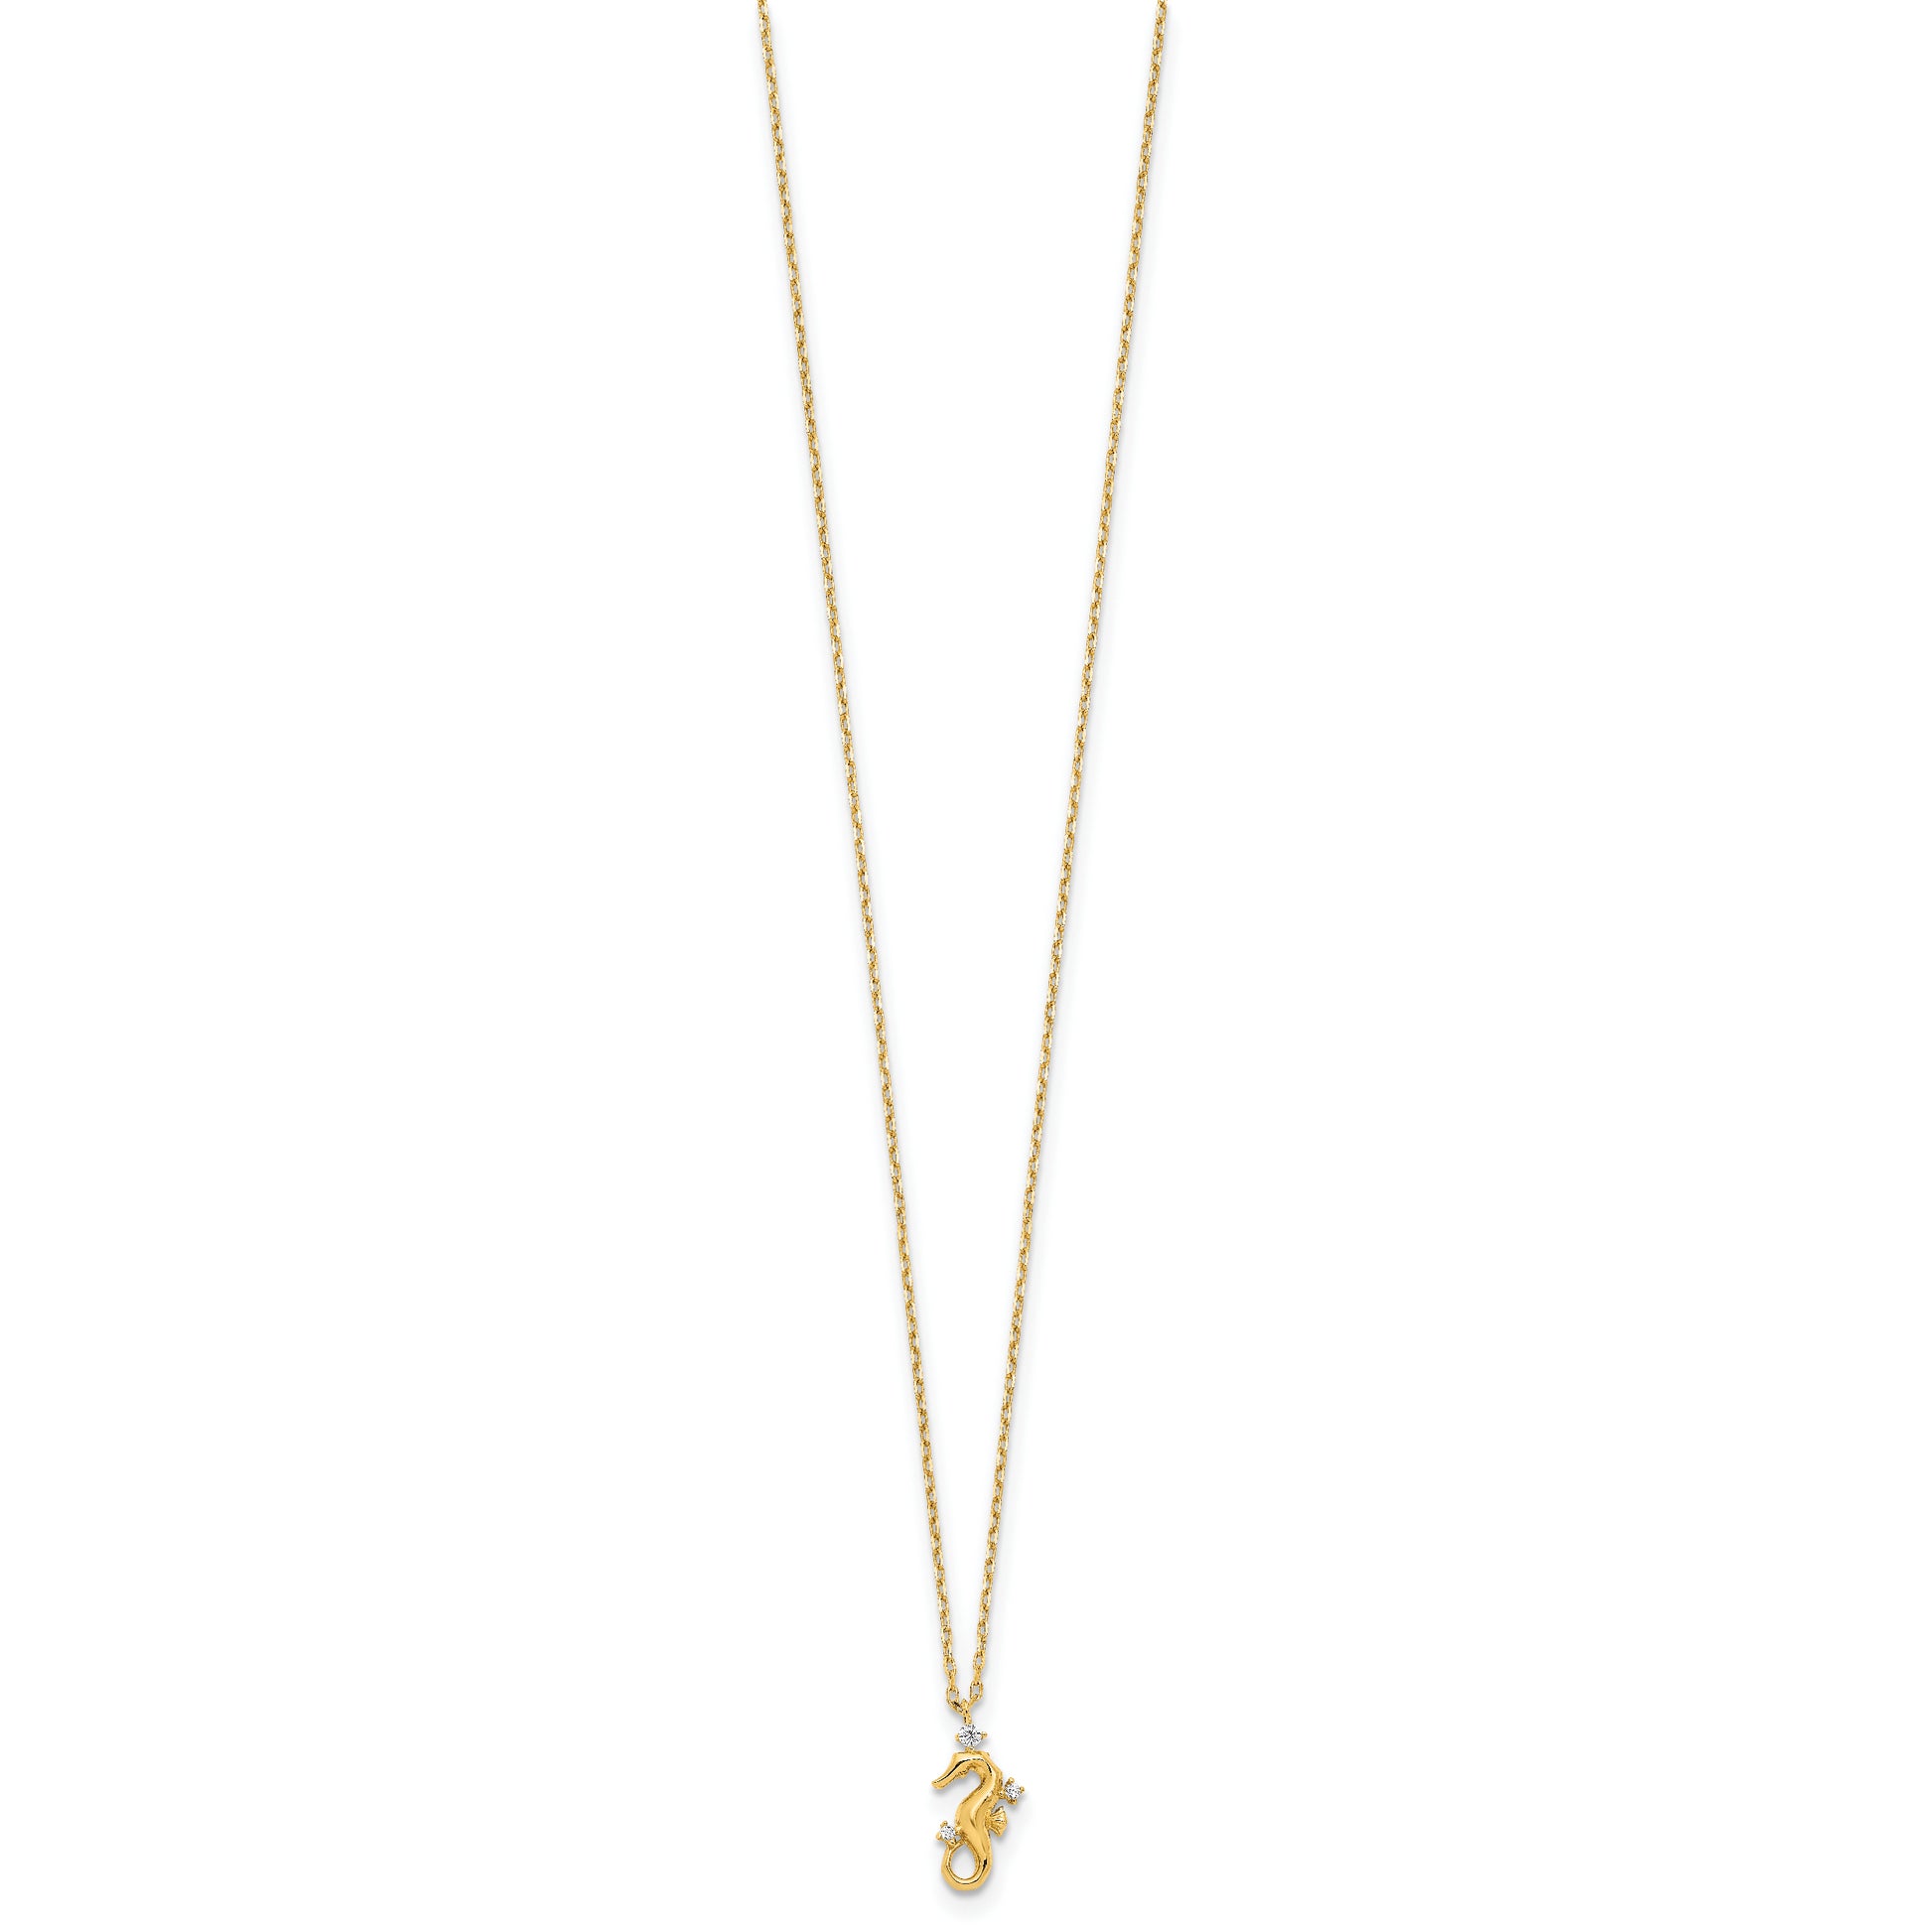 14k Yellow Gold Polished CZ Seahorse w/1.25 in ext Necklace